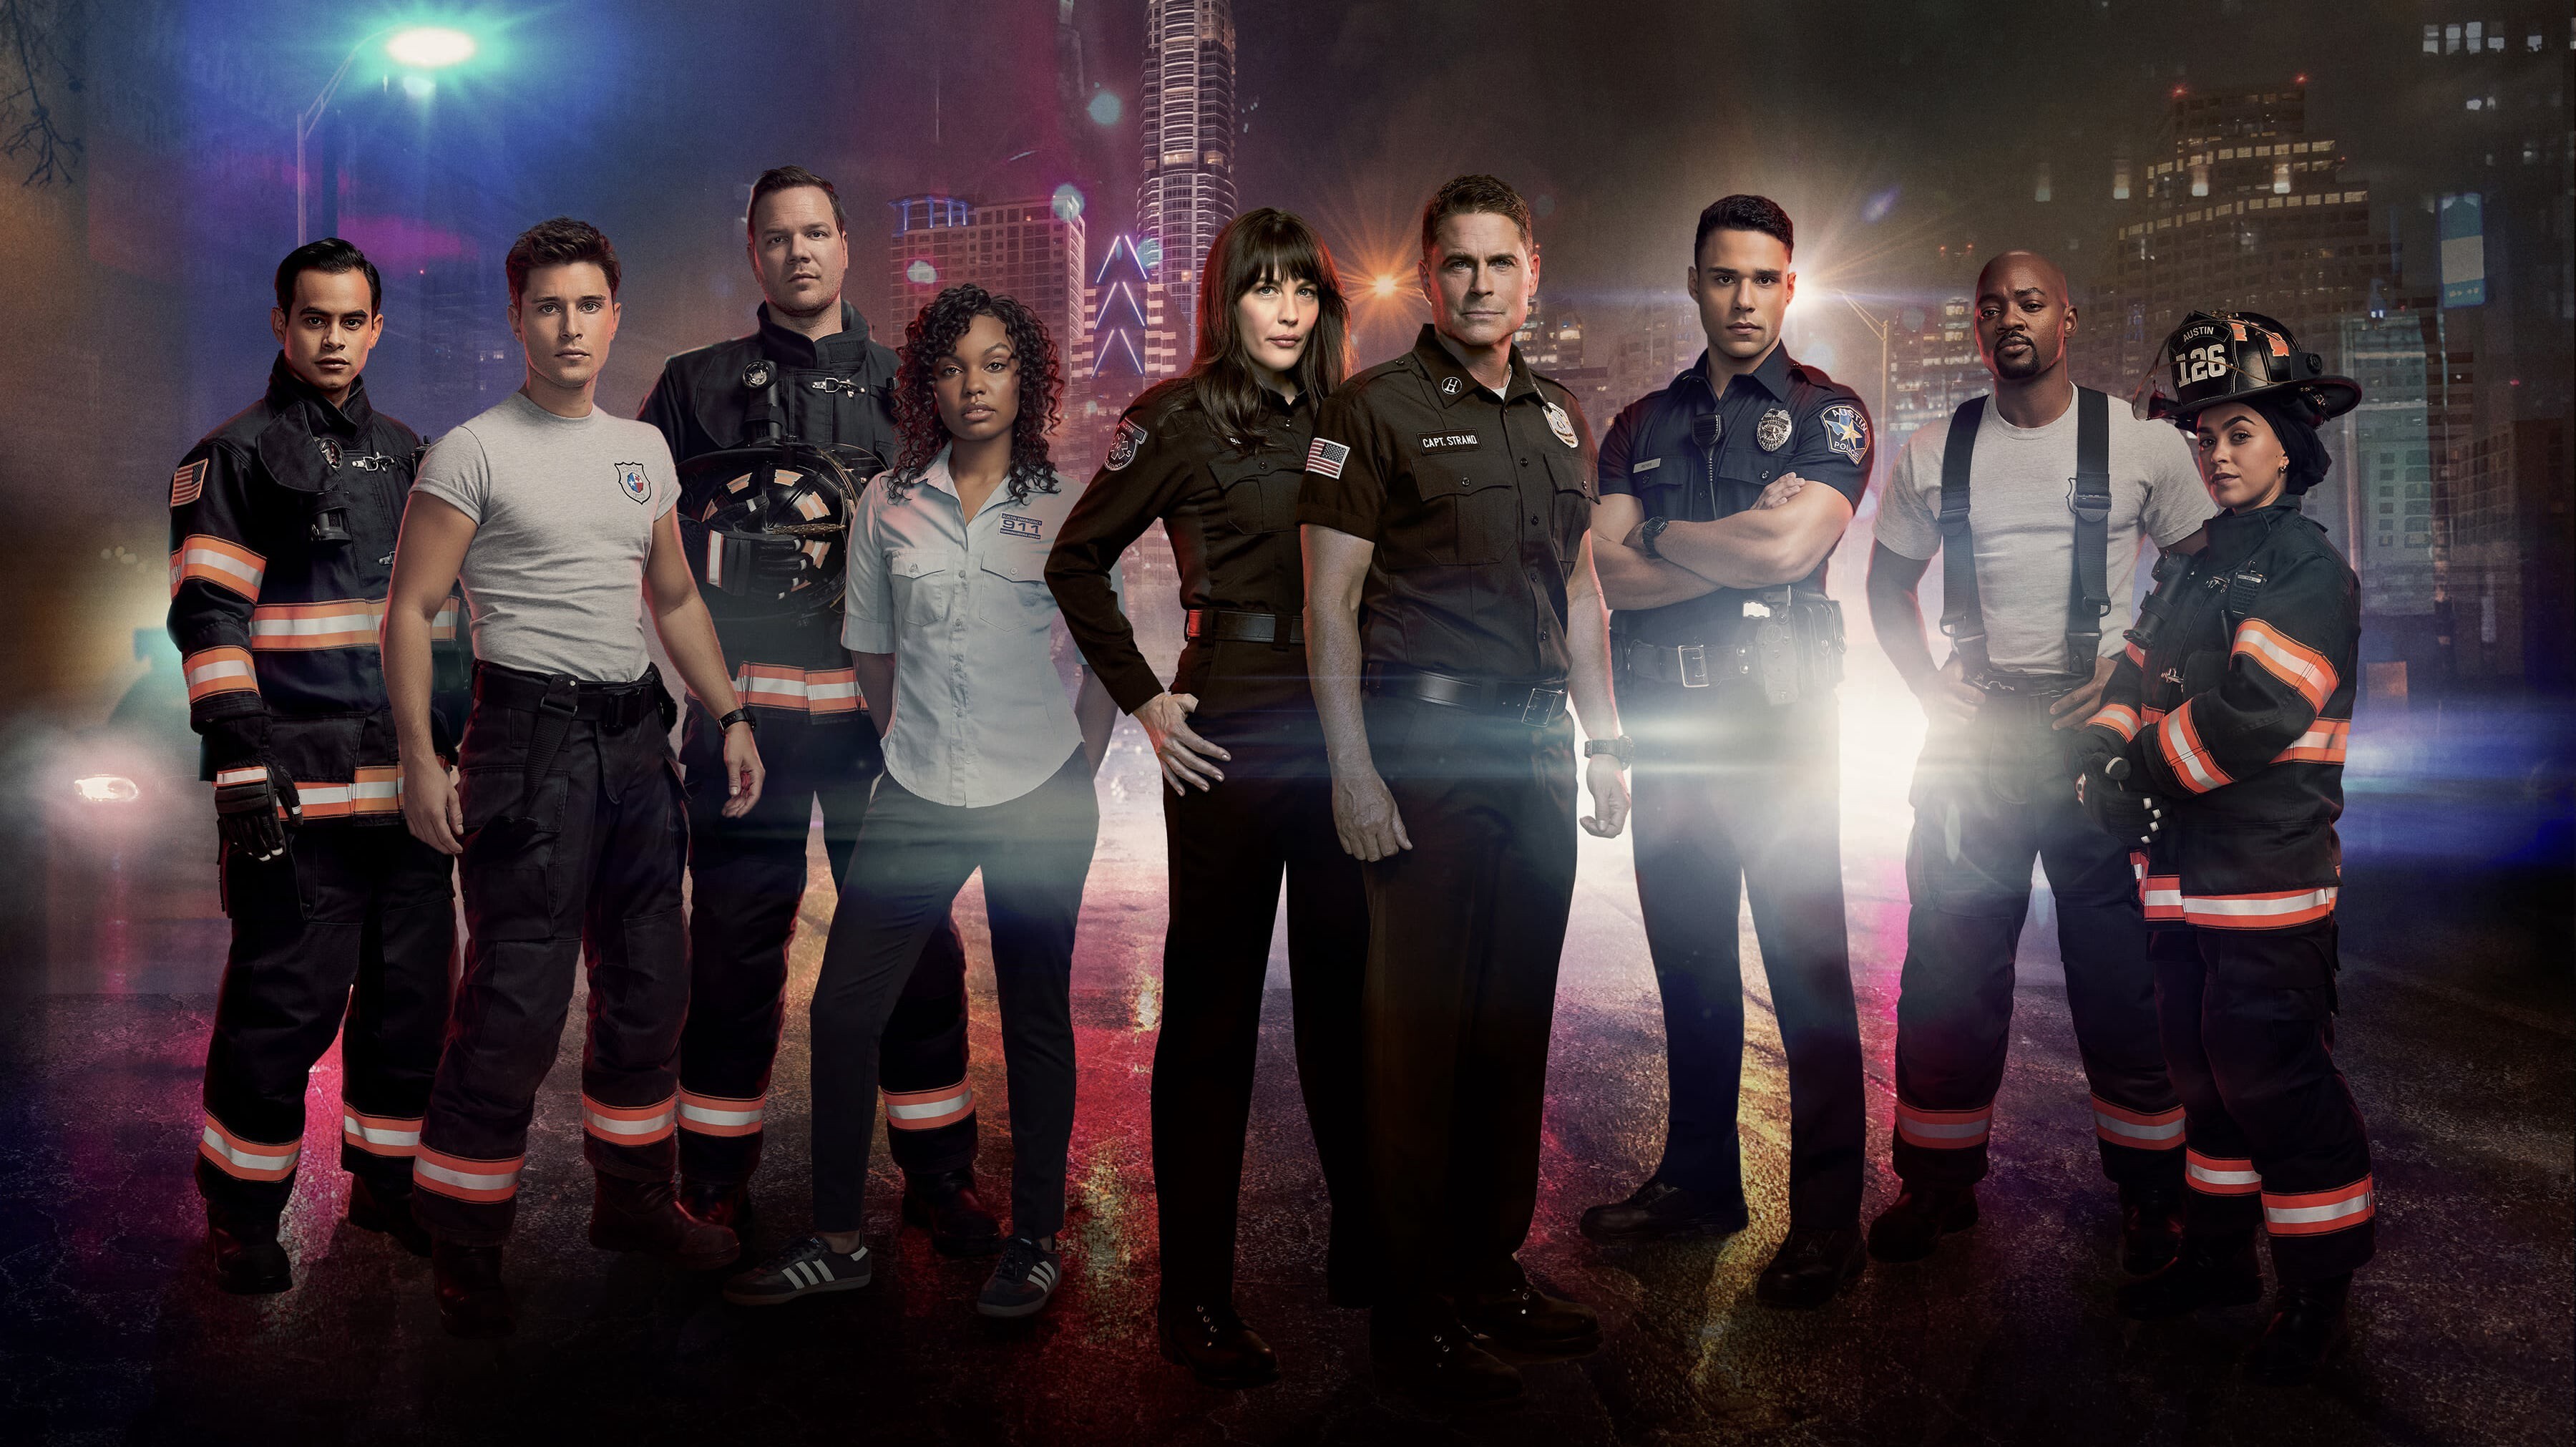 9-1-1: Lone Star (TV Series): TV Show's Cast, Television Series Focusing On The Fire, Police, And Ambulance Departments. 3600x2030 HD Background.